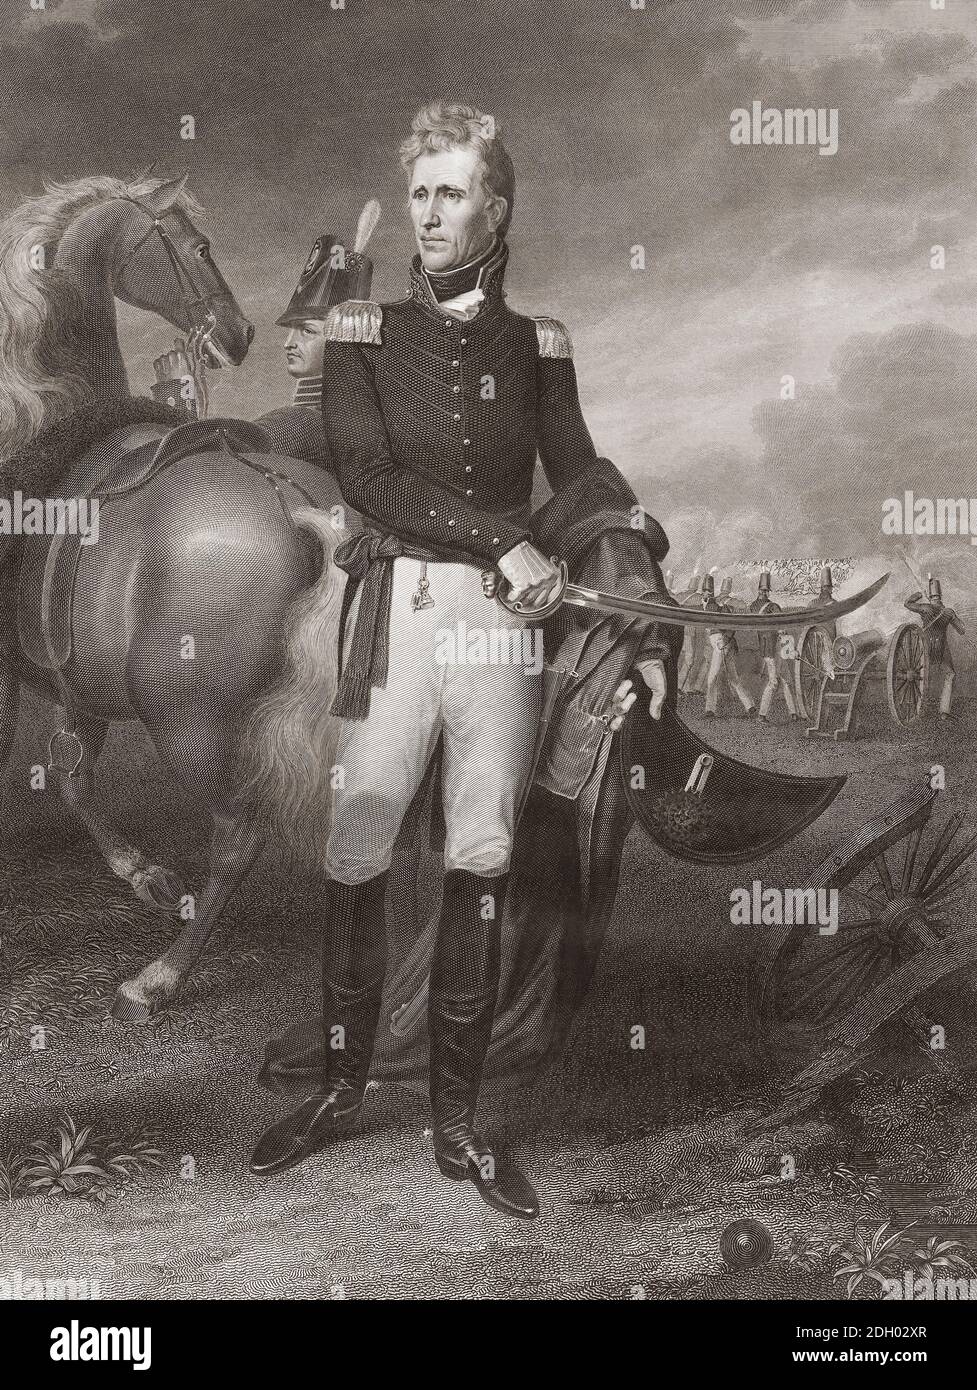 Andrew Jackson, 1767 – 1845.  American soldier and statesman.  Seventh president of the United States.  Here seen as a General.  After an engraving by Asher Brown Durand from a work by John Vanderlyn. Stock Photo